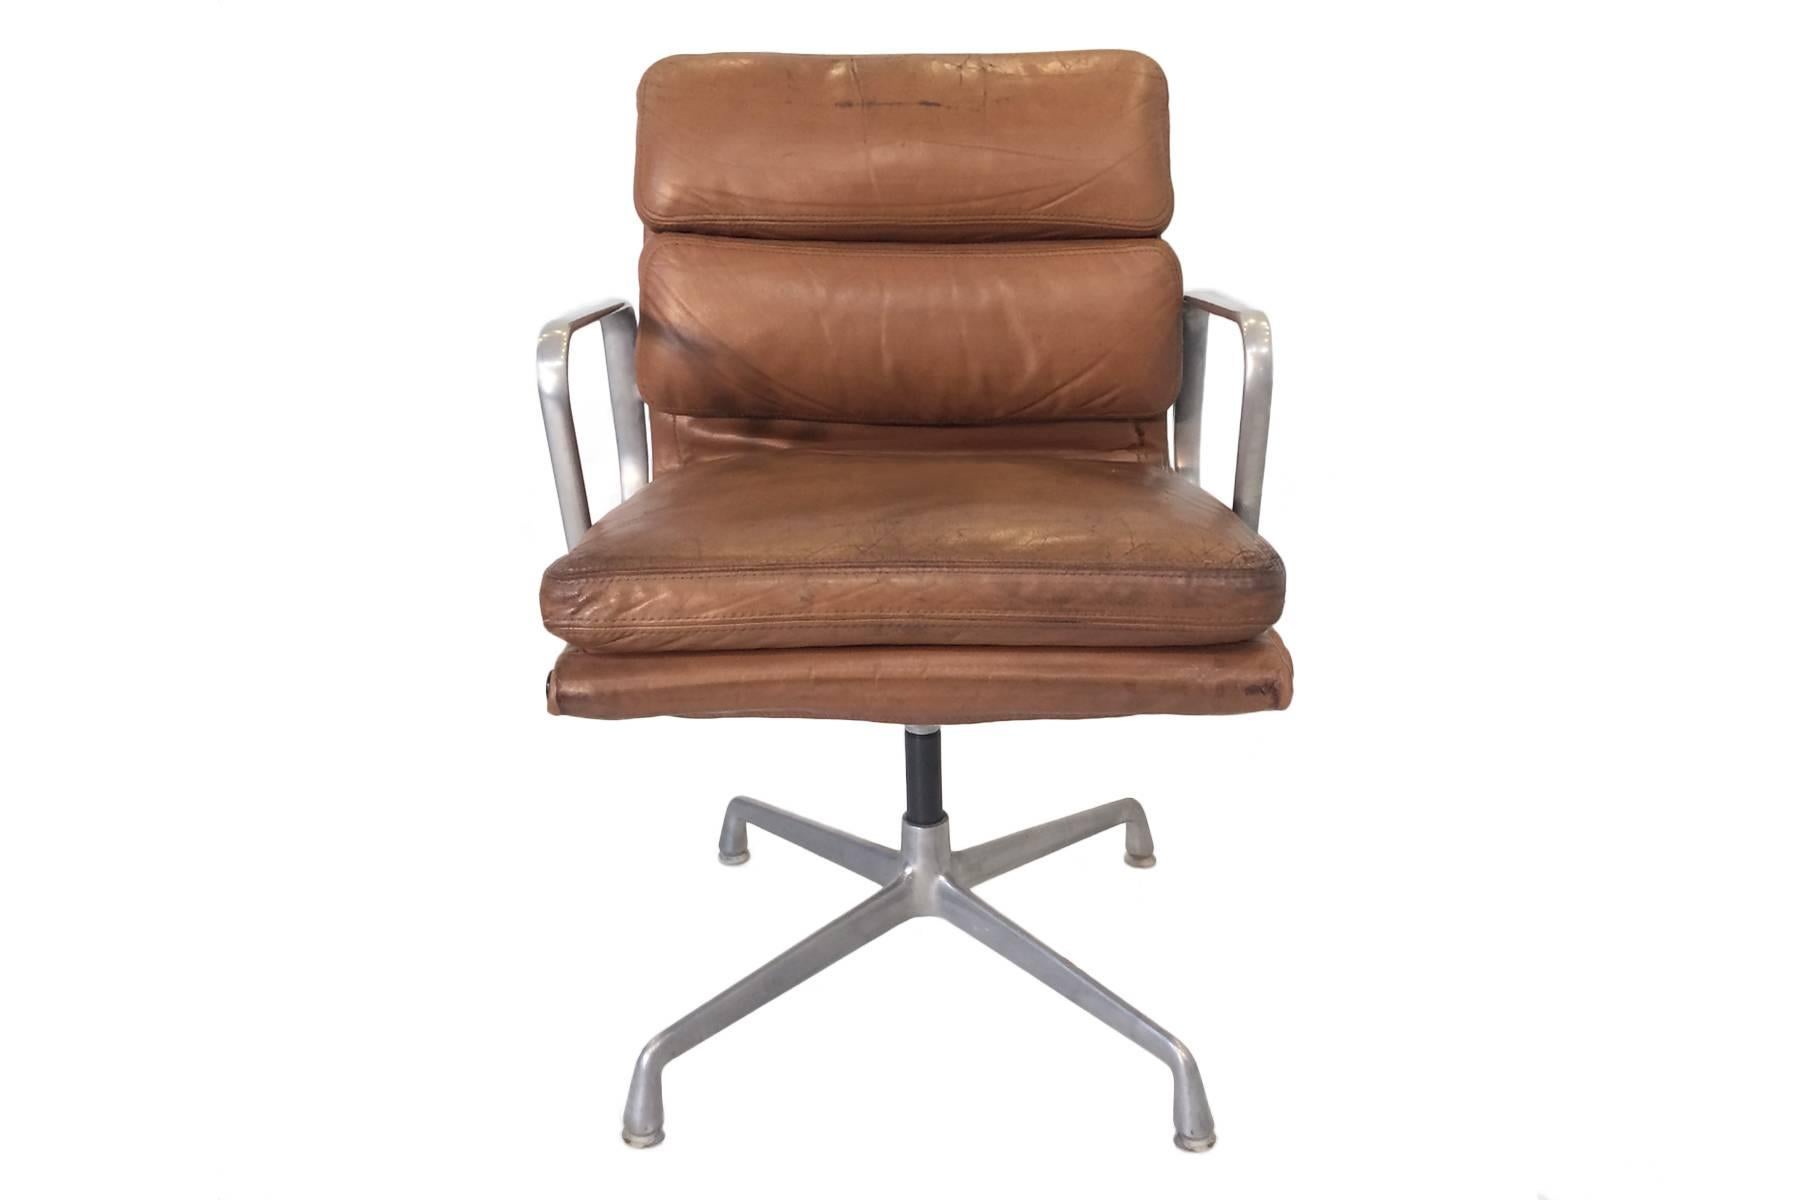 A design Classic, this Eames soft pad chair has certainly seen some action! The natural wear to this item will either delight or distress you depending on your ethos on vintage pieces. Many collectors like to see honest wear on their items and